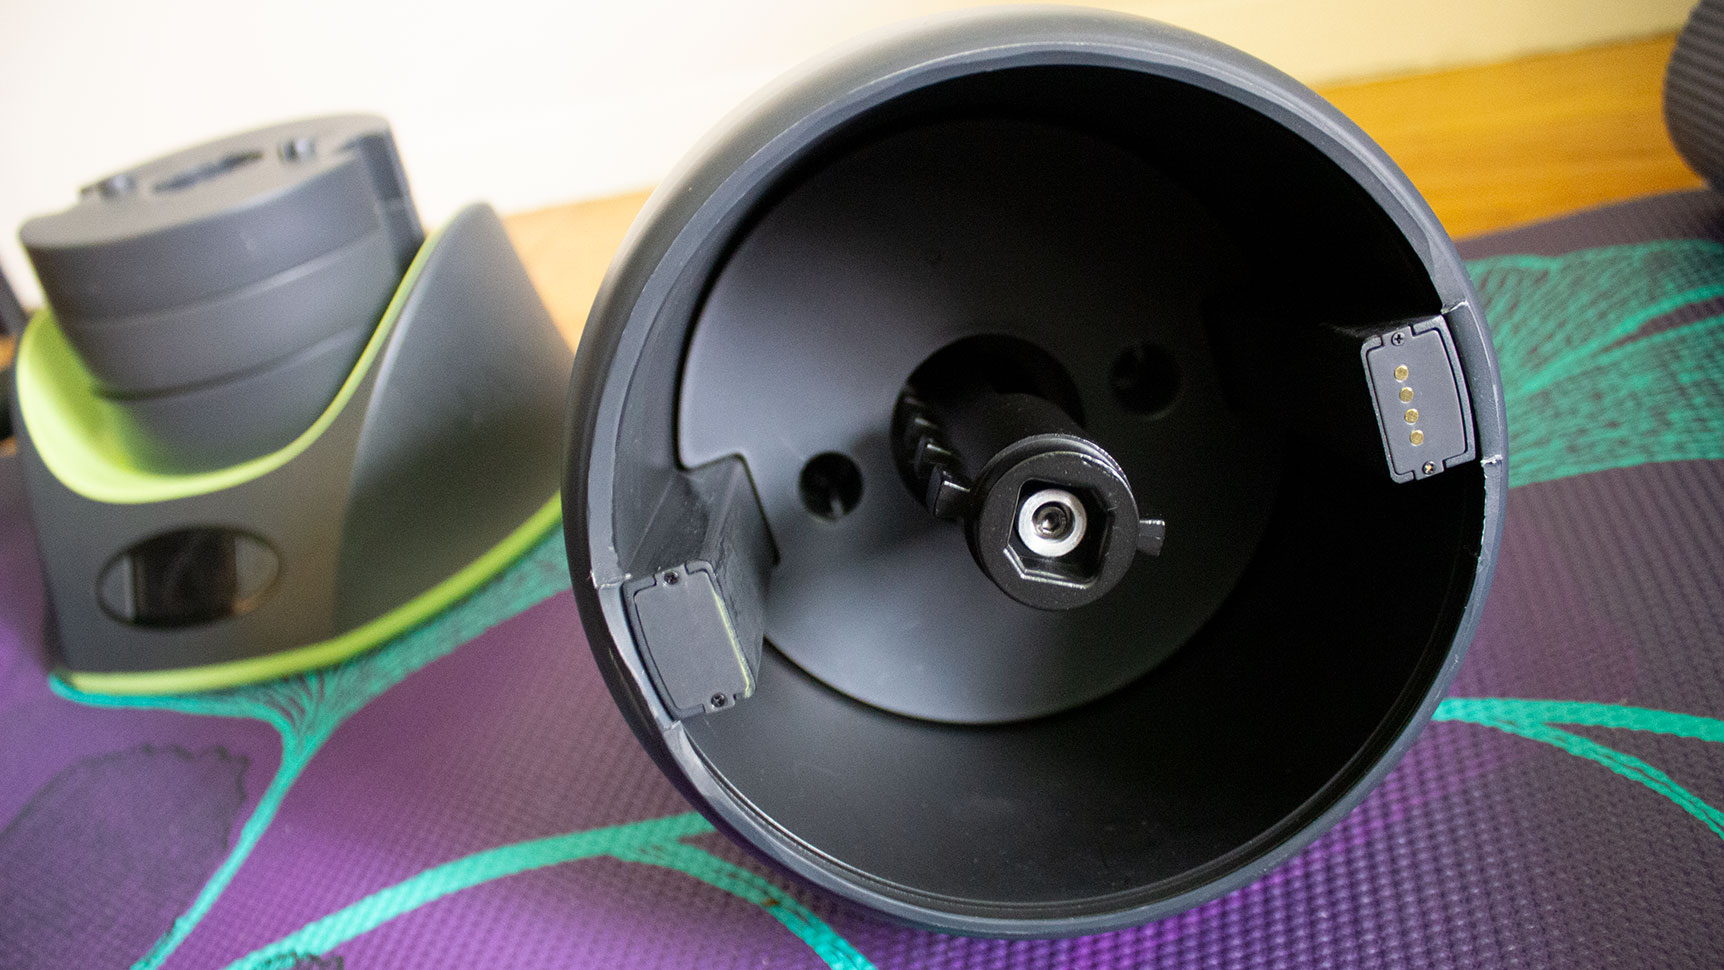 The KettlebellConnect is essentially a shell, so unfortunately it is the same big size regardless of what weight you use. (Photo: Victoria Song/Gizmodo)